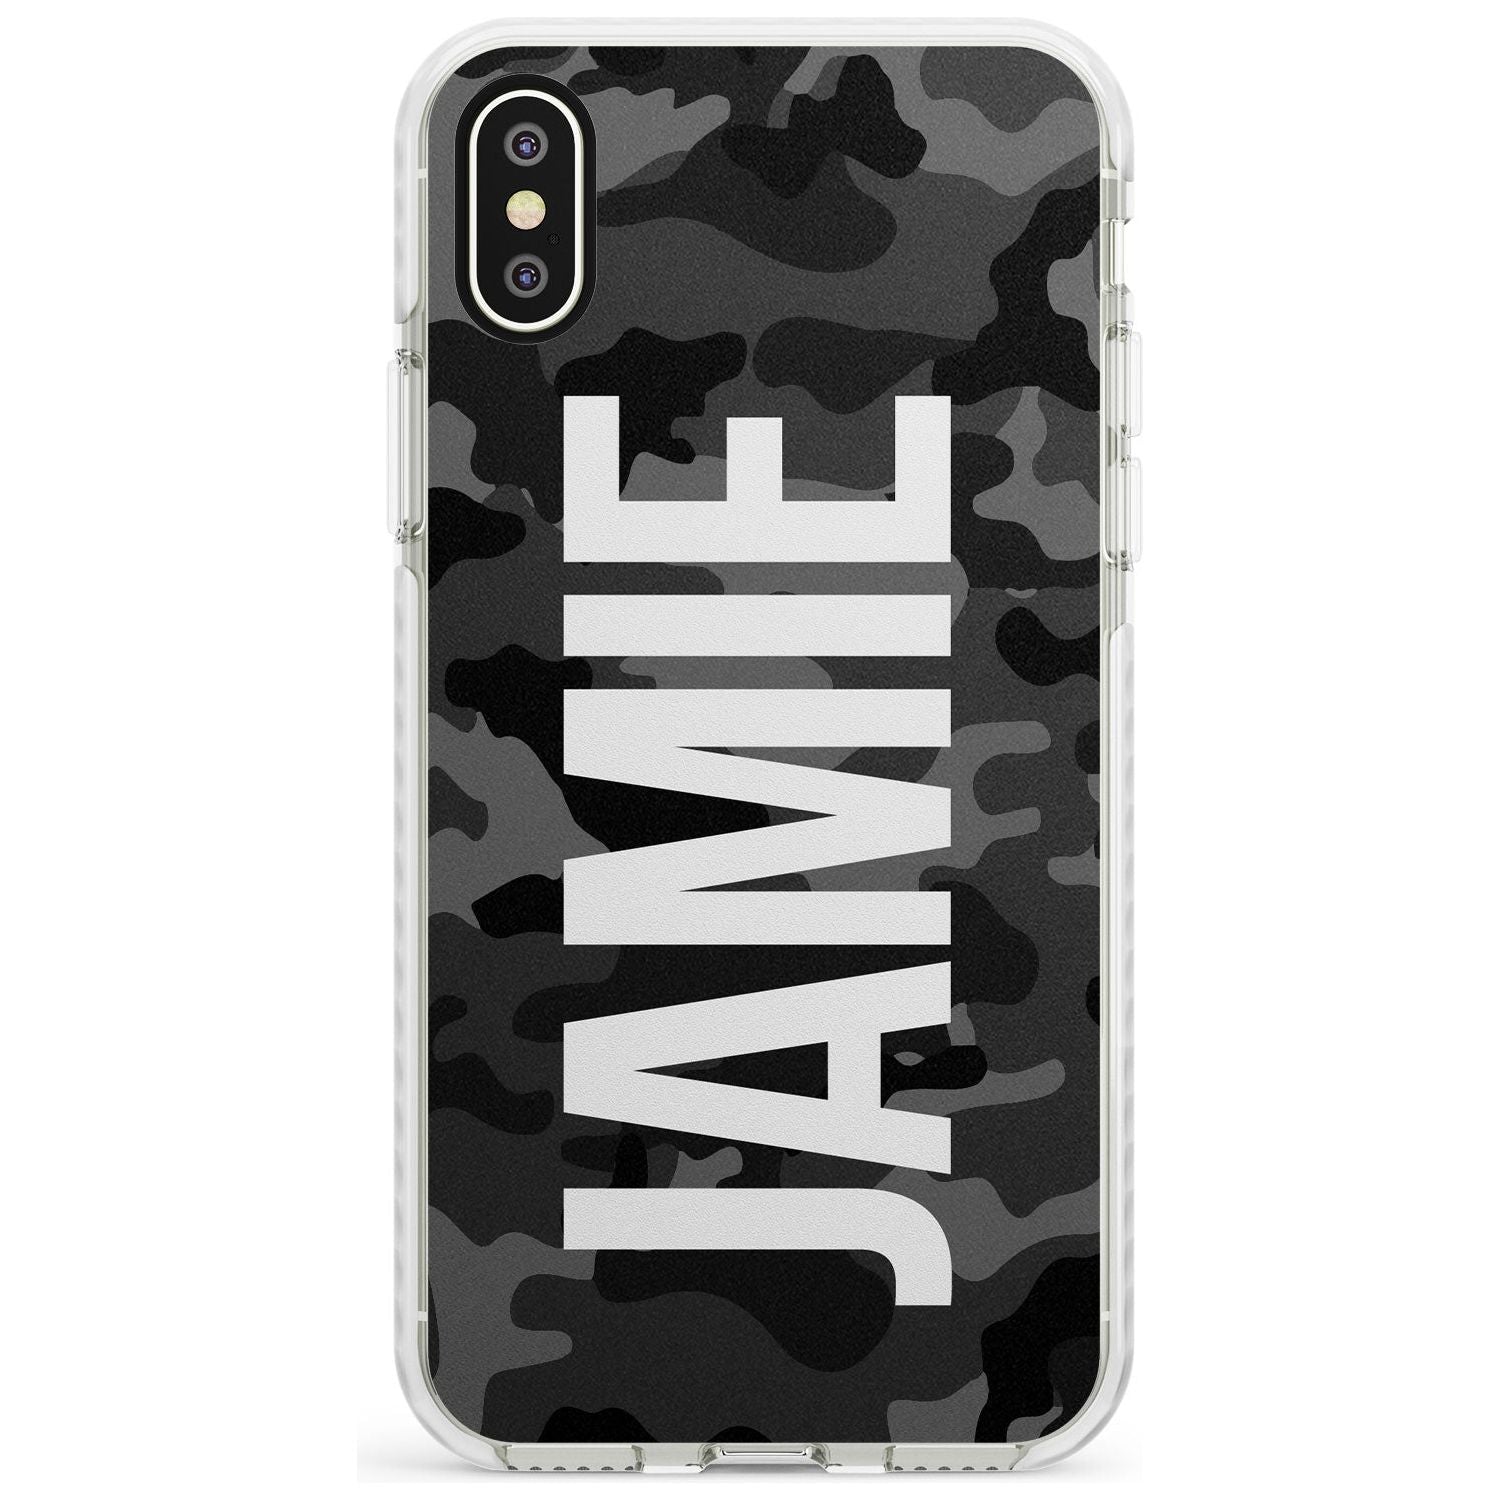 Vertical Name Personalised Black Camouflage Impact Phone Case for iPhone X XS Max XR